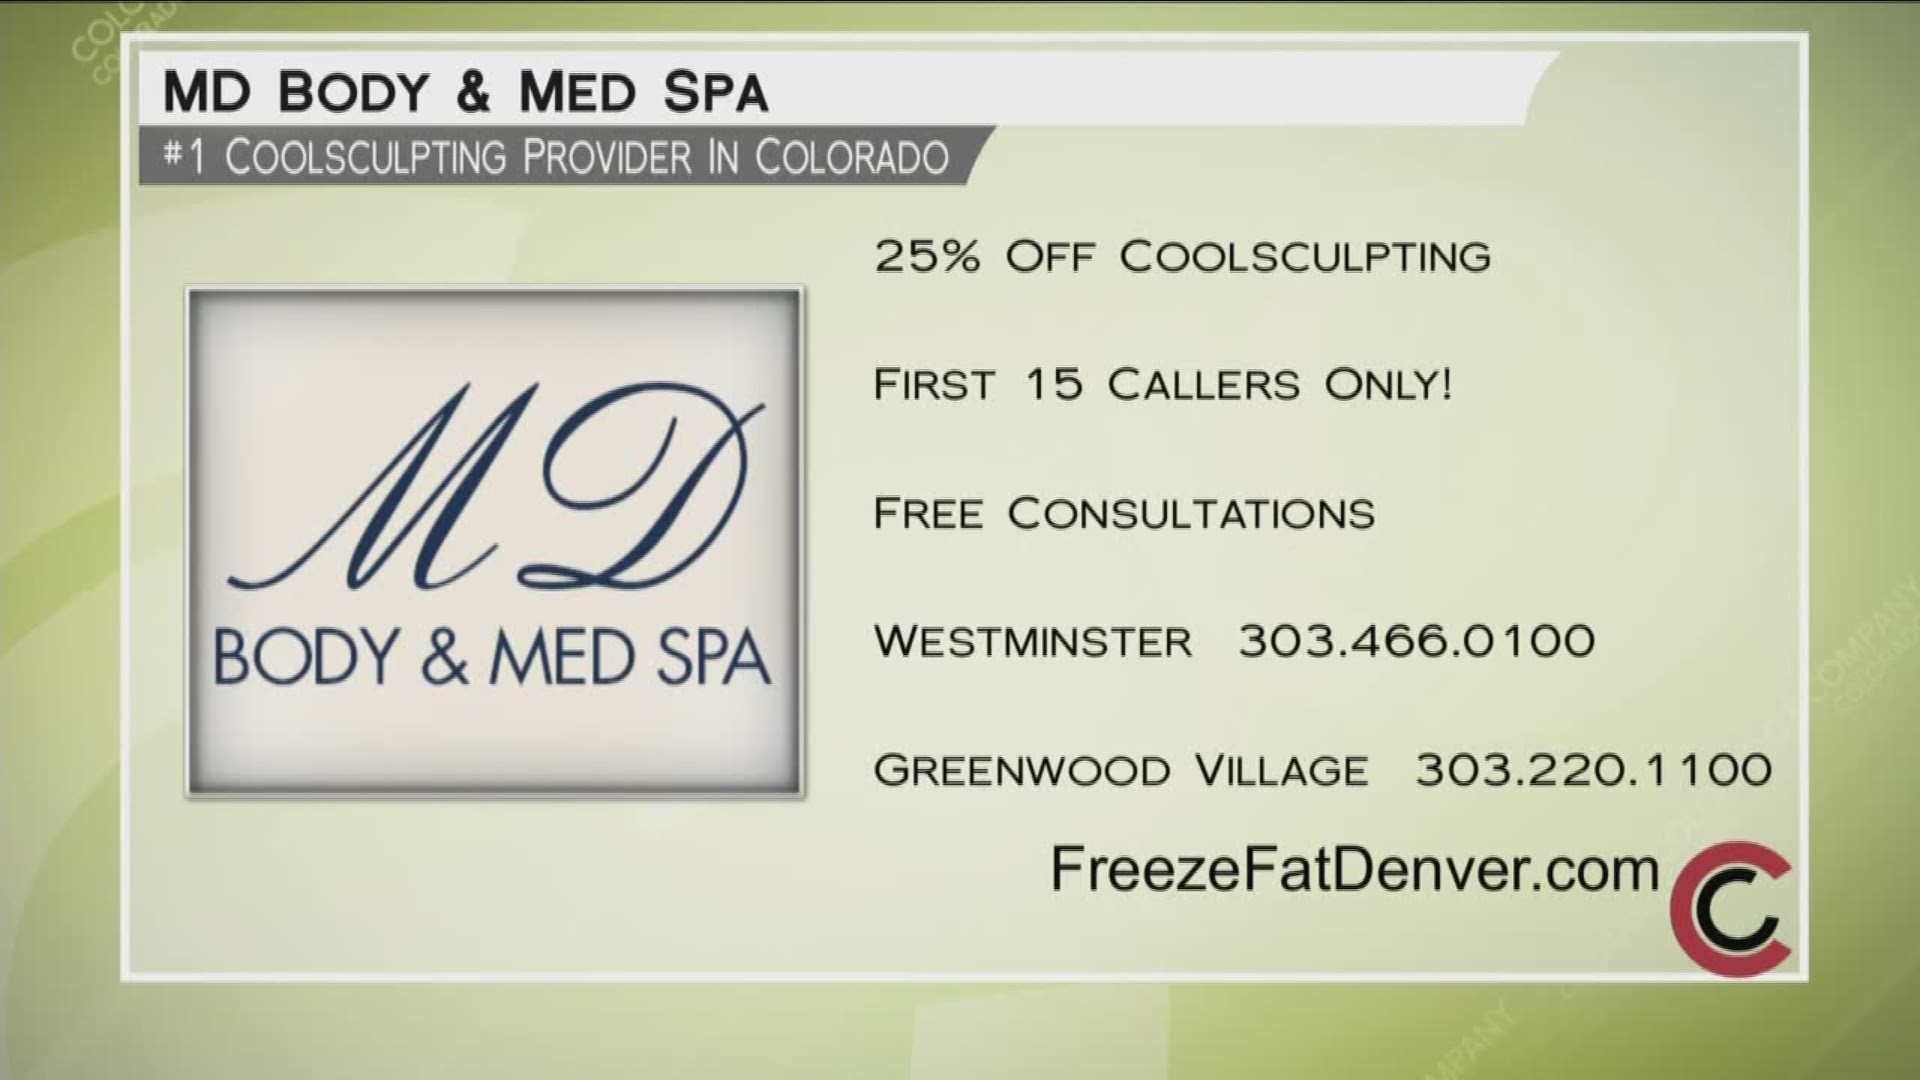 MD Body and Med Spa has convenient locations in Westminster and Greenwood Village. Call 303.466.0100 or 303.220.1100, or visit FreezeFatDenver.com to learn more.